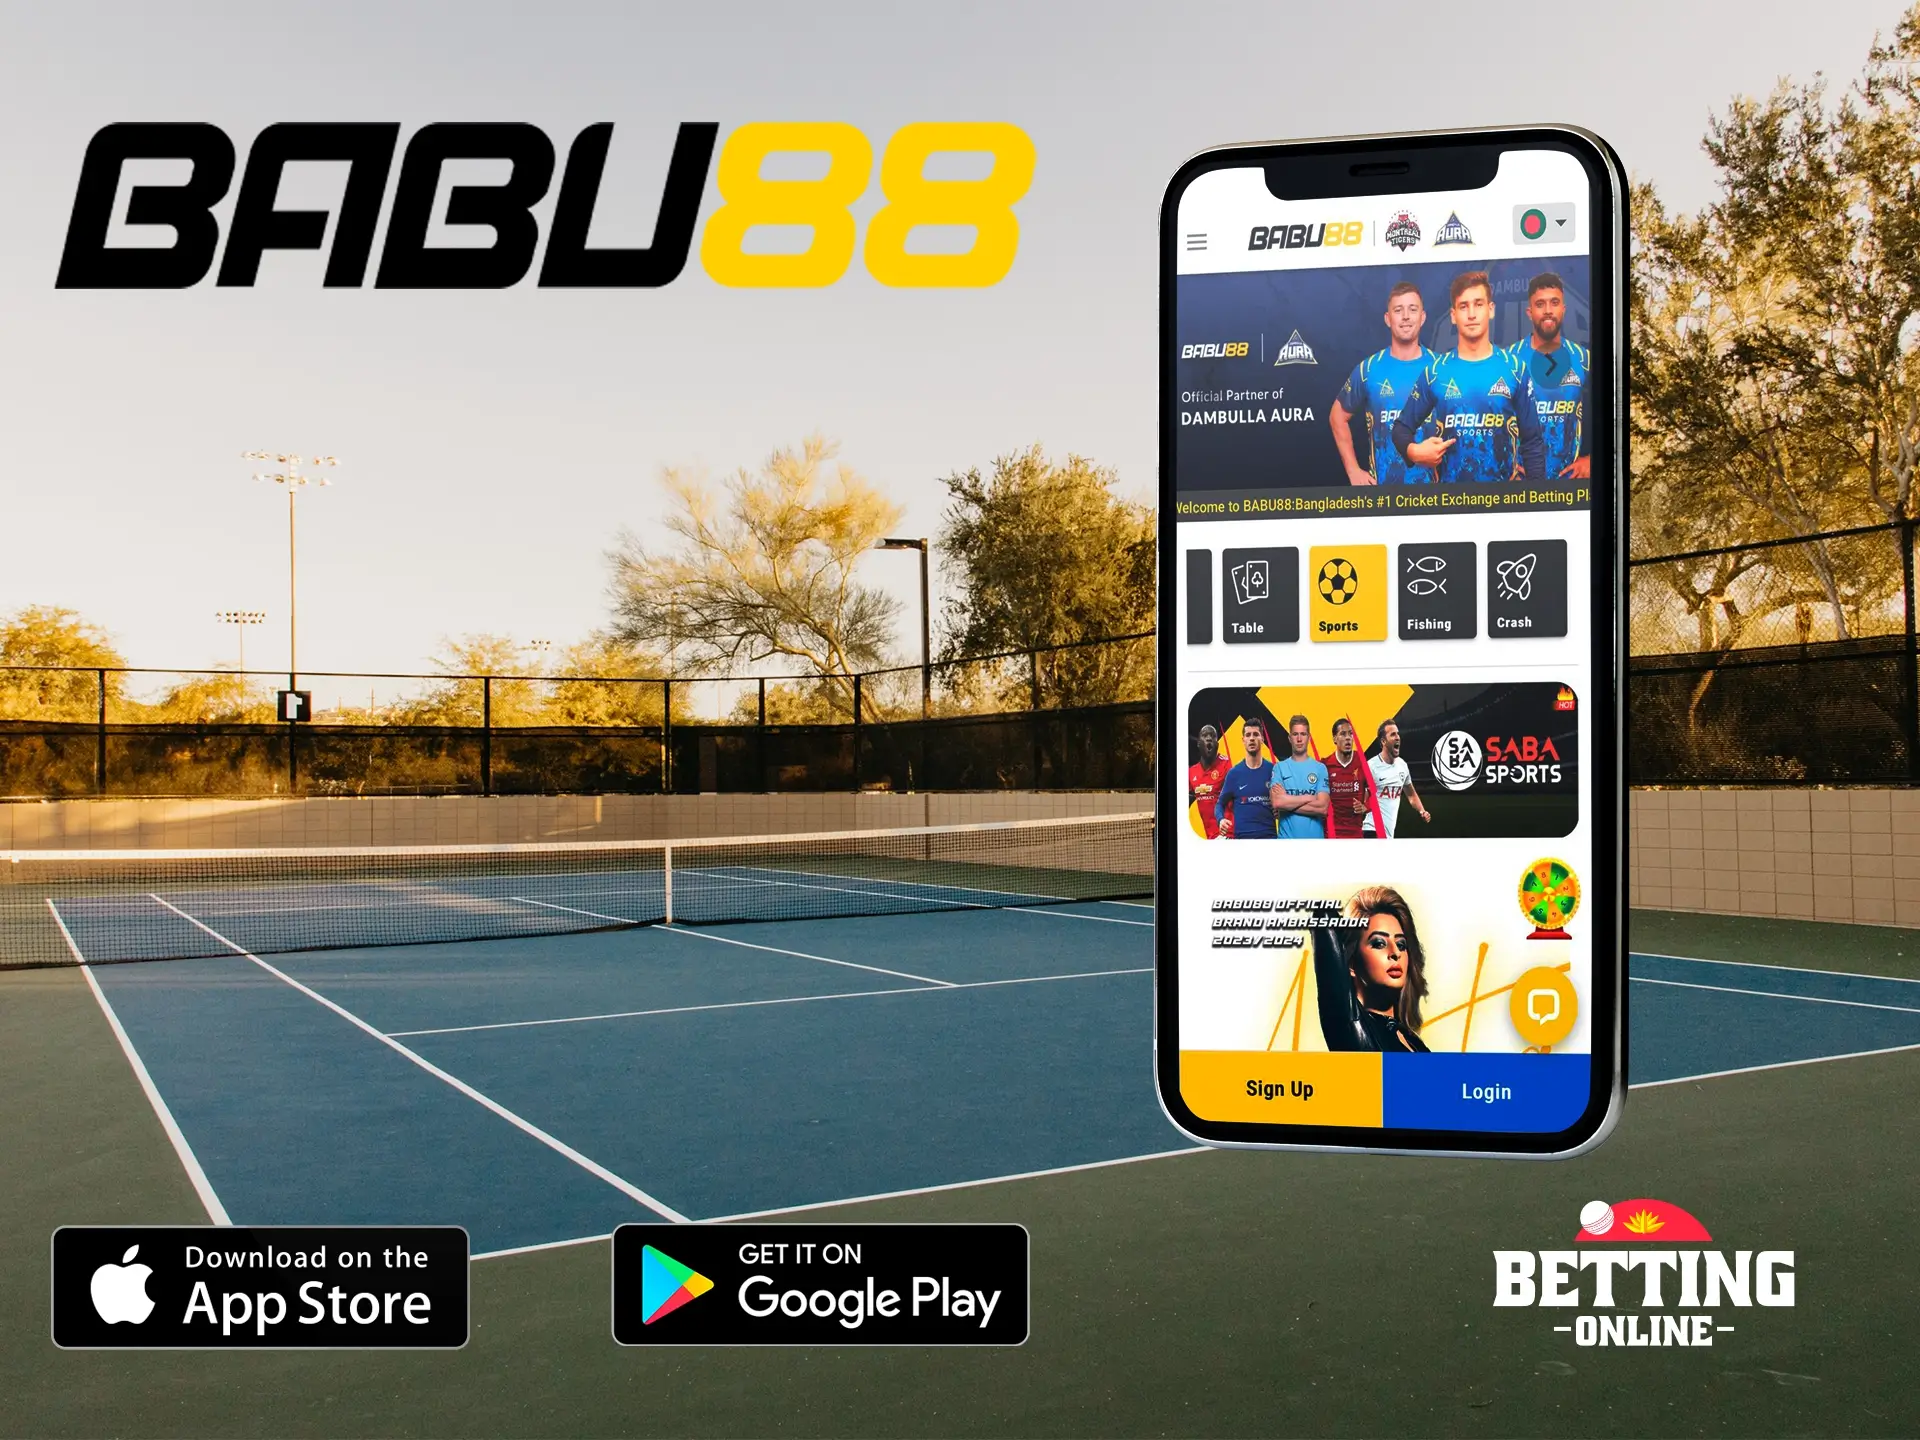 Using the app from Babu88 you will forget about failures forever.